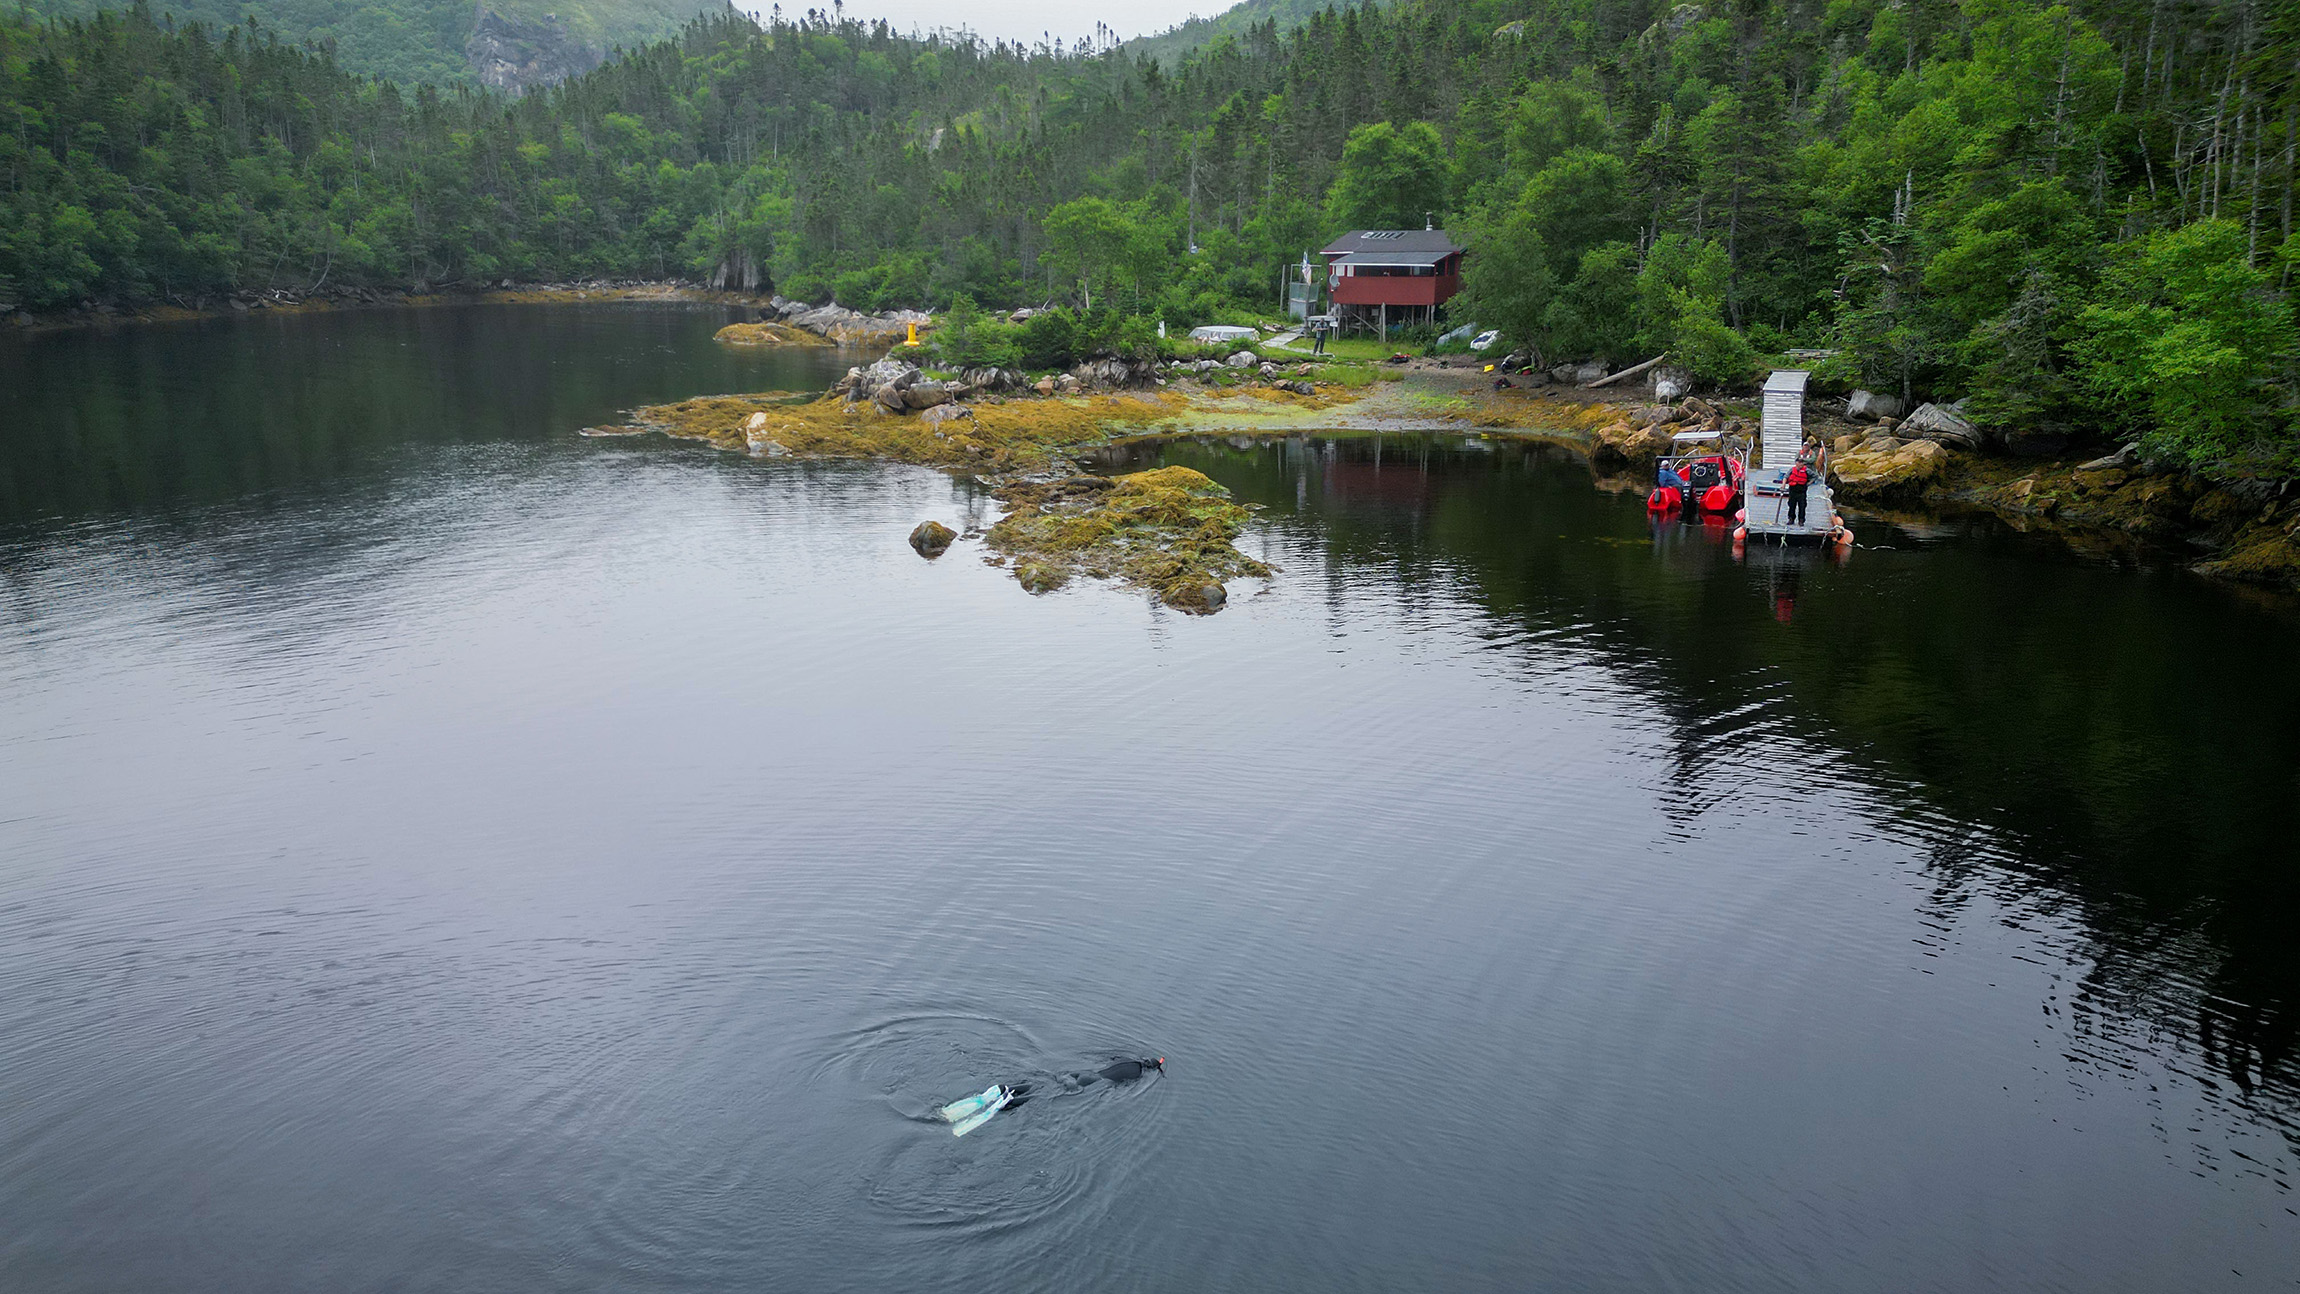 In the foreground, a snorkeler wearing fins moves at the surface of dark water. In the background, a person stands on a floating dock attached to the mossy shoreline, next to a boat, watching the snorkeler, with mist and green forested hillsides to his back.